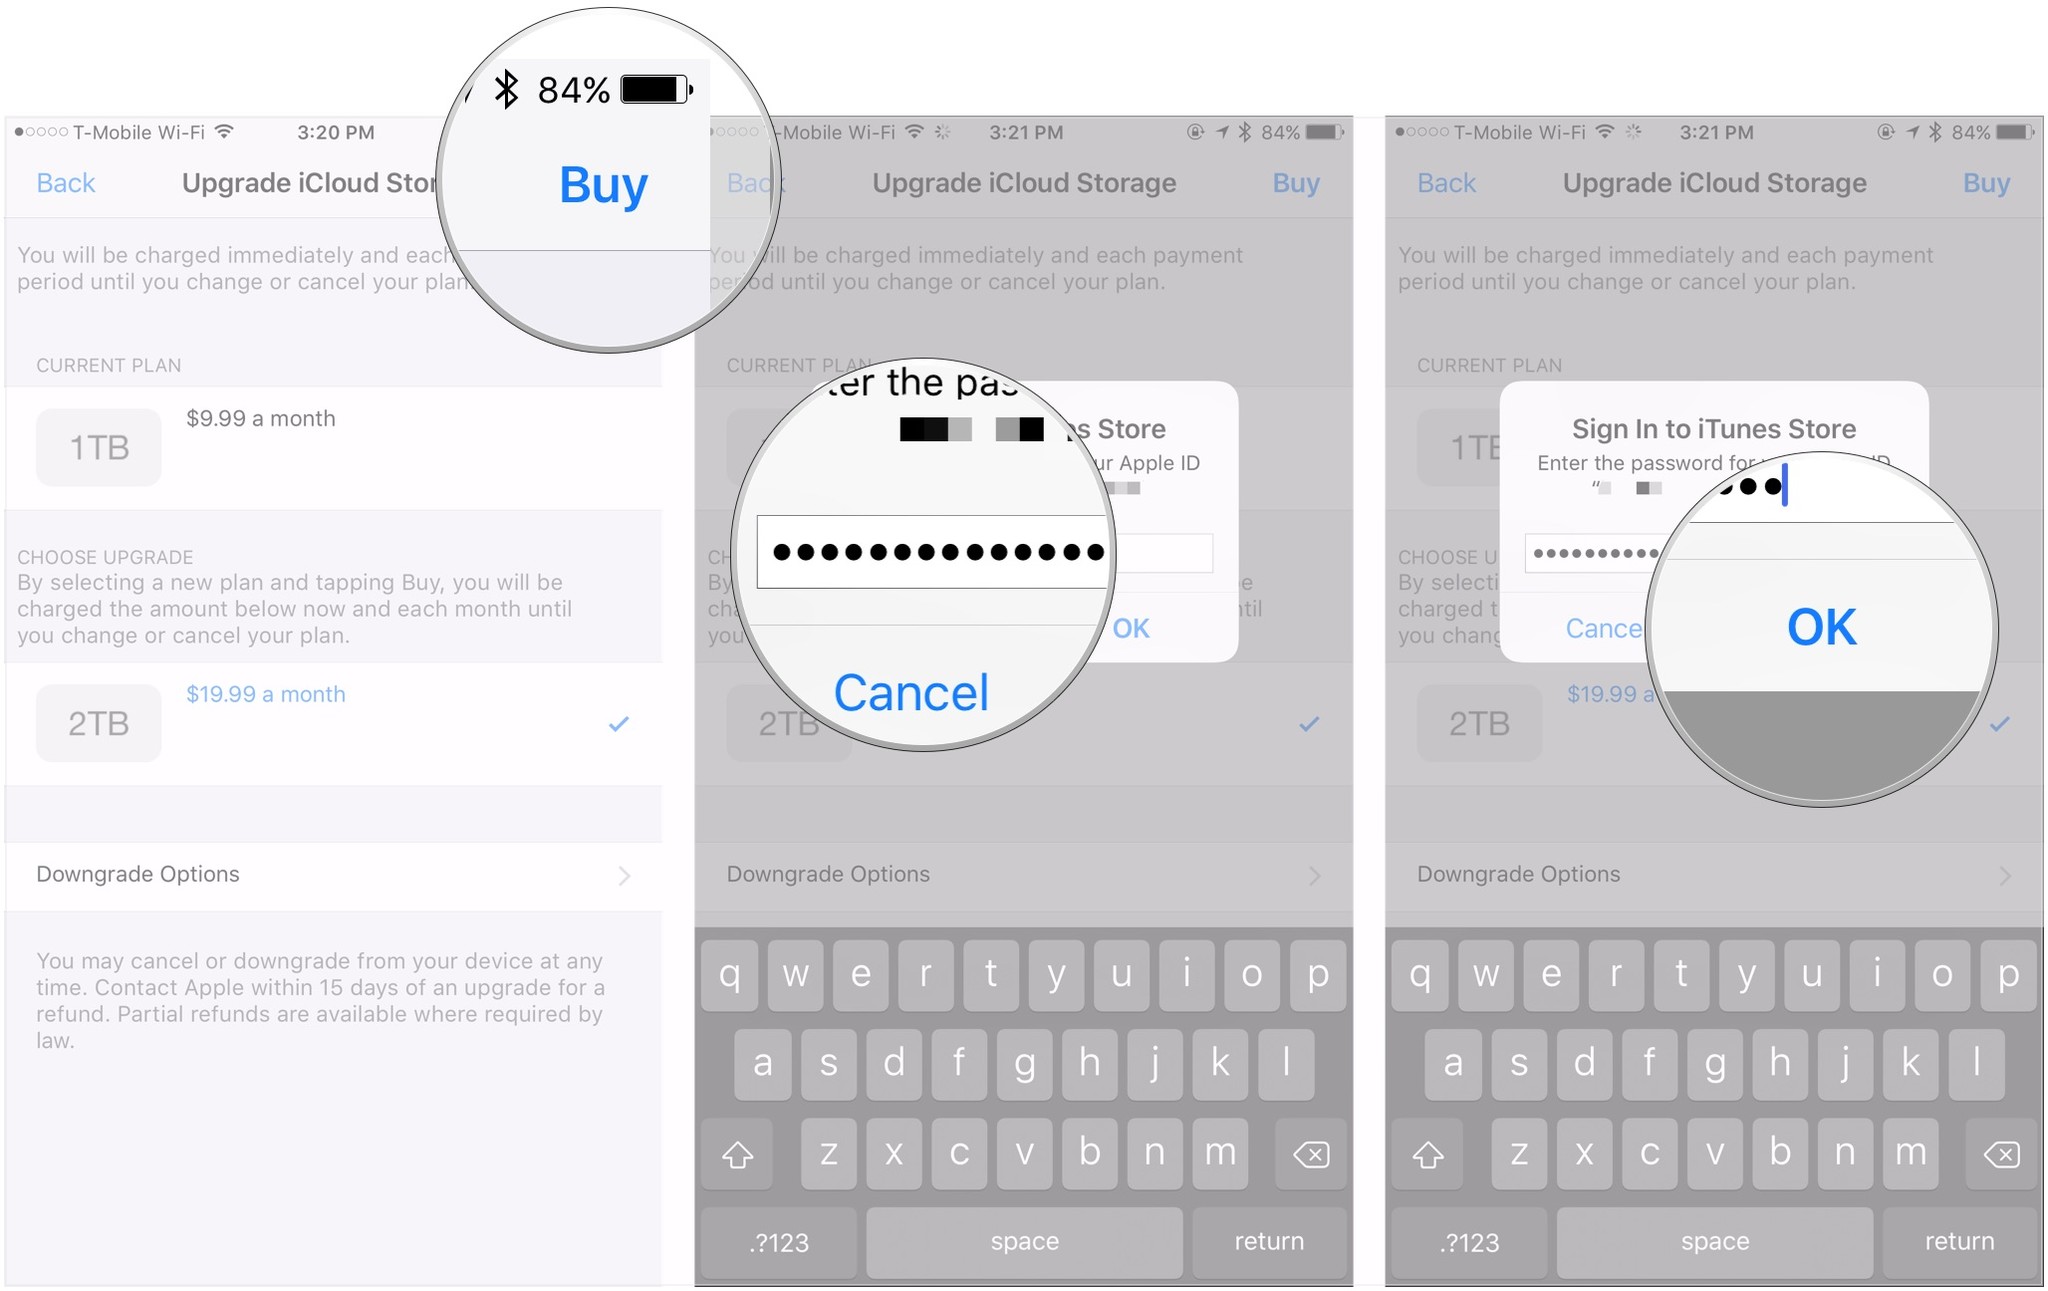 How to buy more iCloud storage on iPhone and iPad by showing steps: Tap Buy, enter password, tap OK